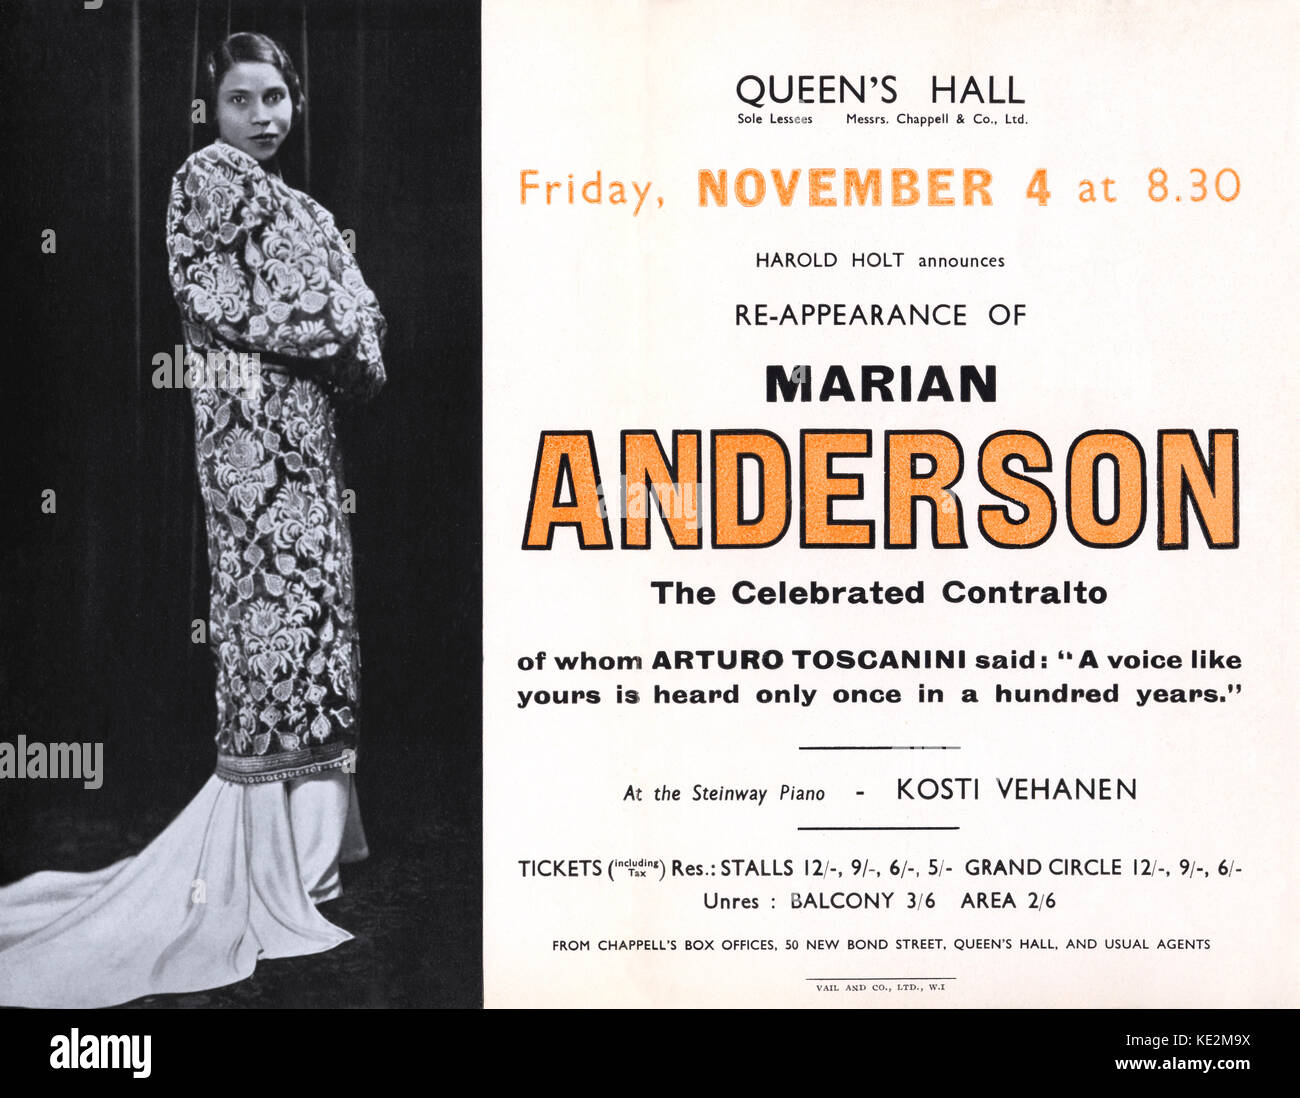 Marian Anderson - programme advert for concert performance at the Queen's Hall, 'the celebrated Contralto, of whom Arturo Toscanini said 'A voice like yours is heard only once in a hundred years'', on 4 November. Portrait in Thirties dress. MA: 17 February 1902 - 8 April 1993. Vintage realia. Stock Photo